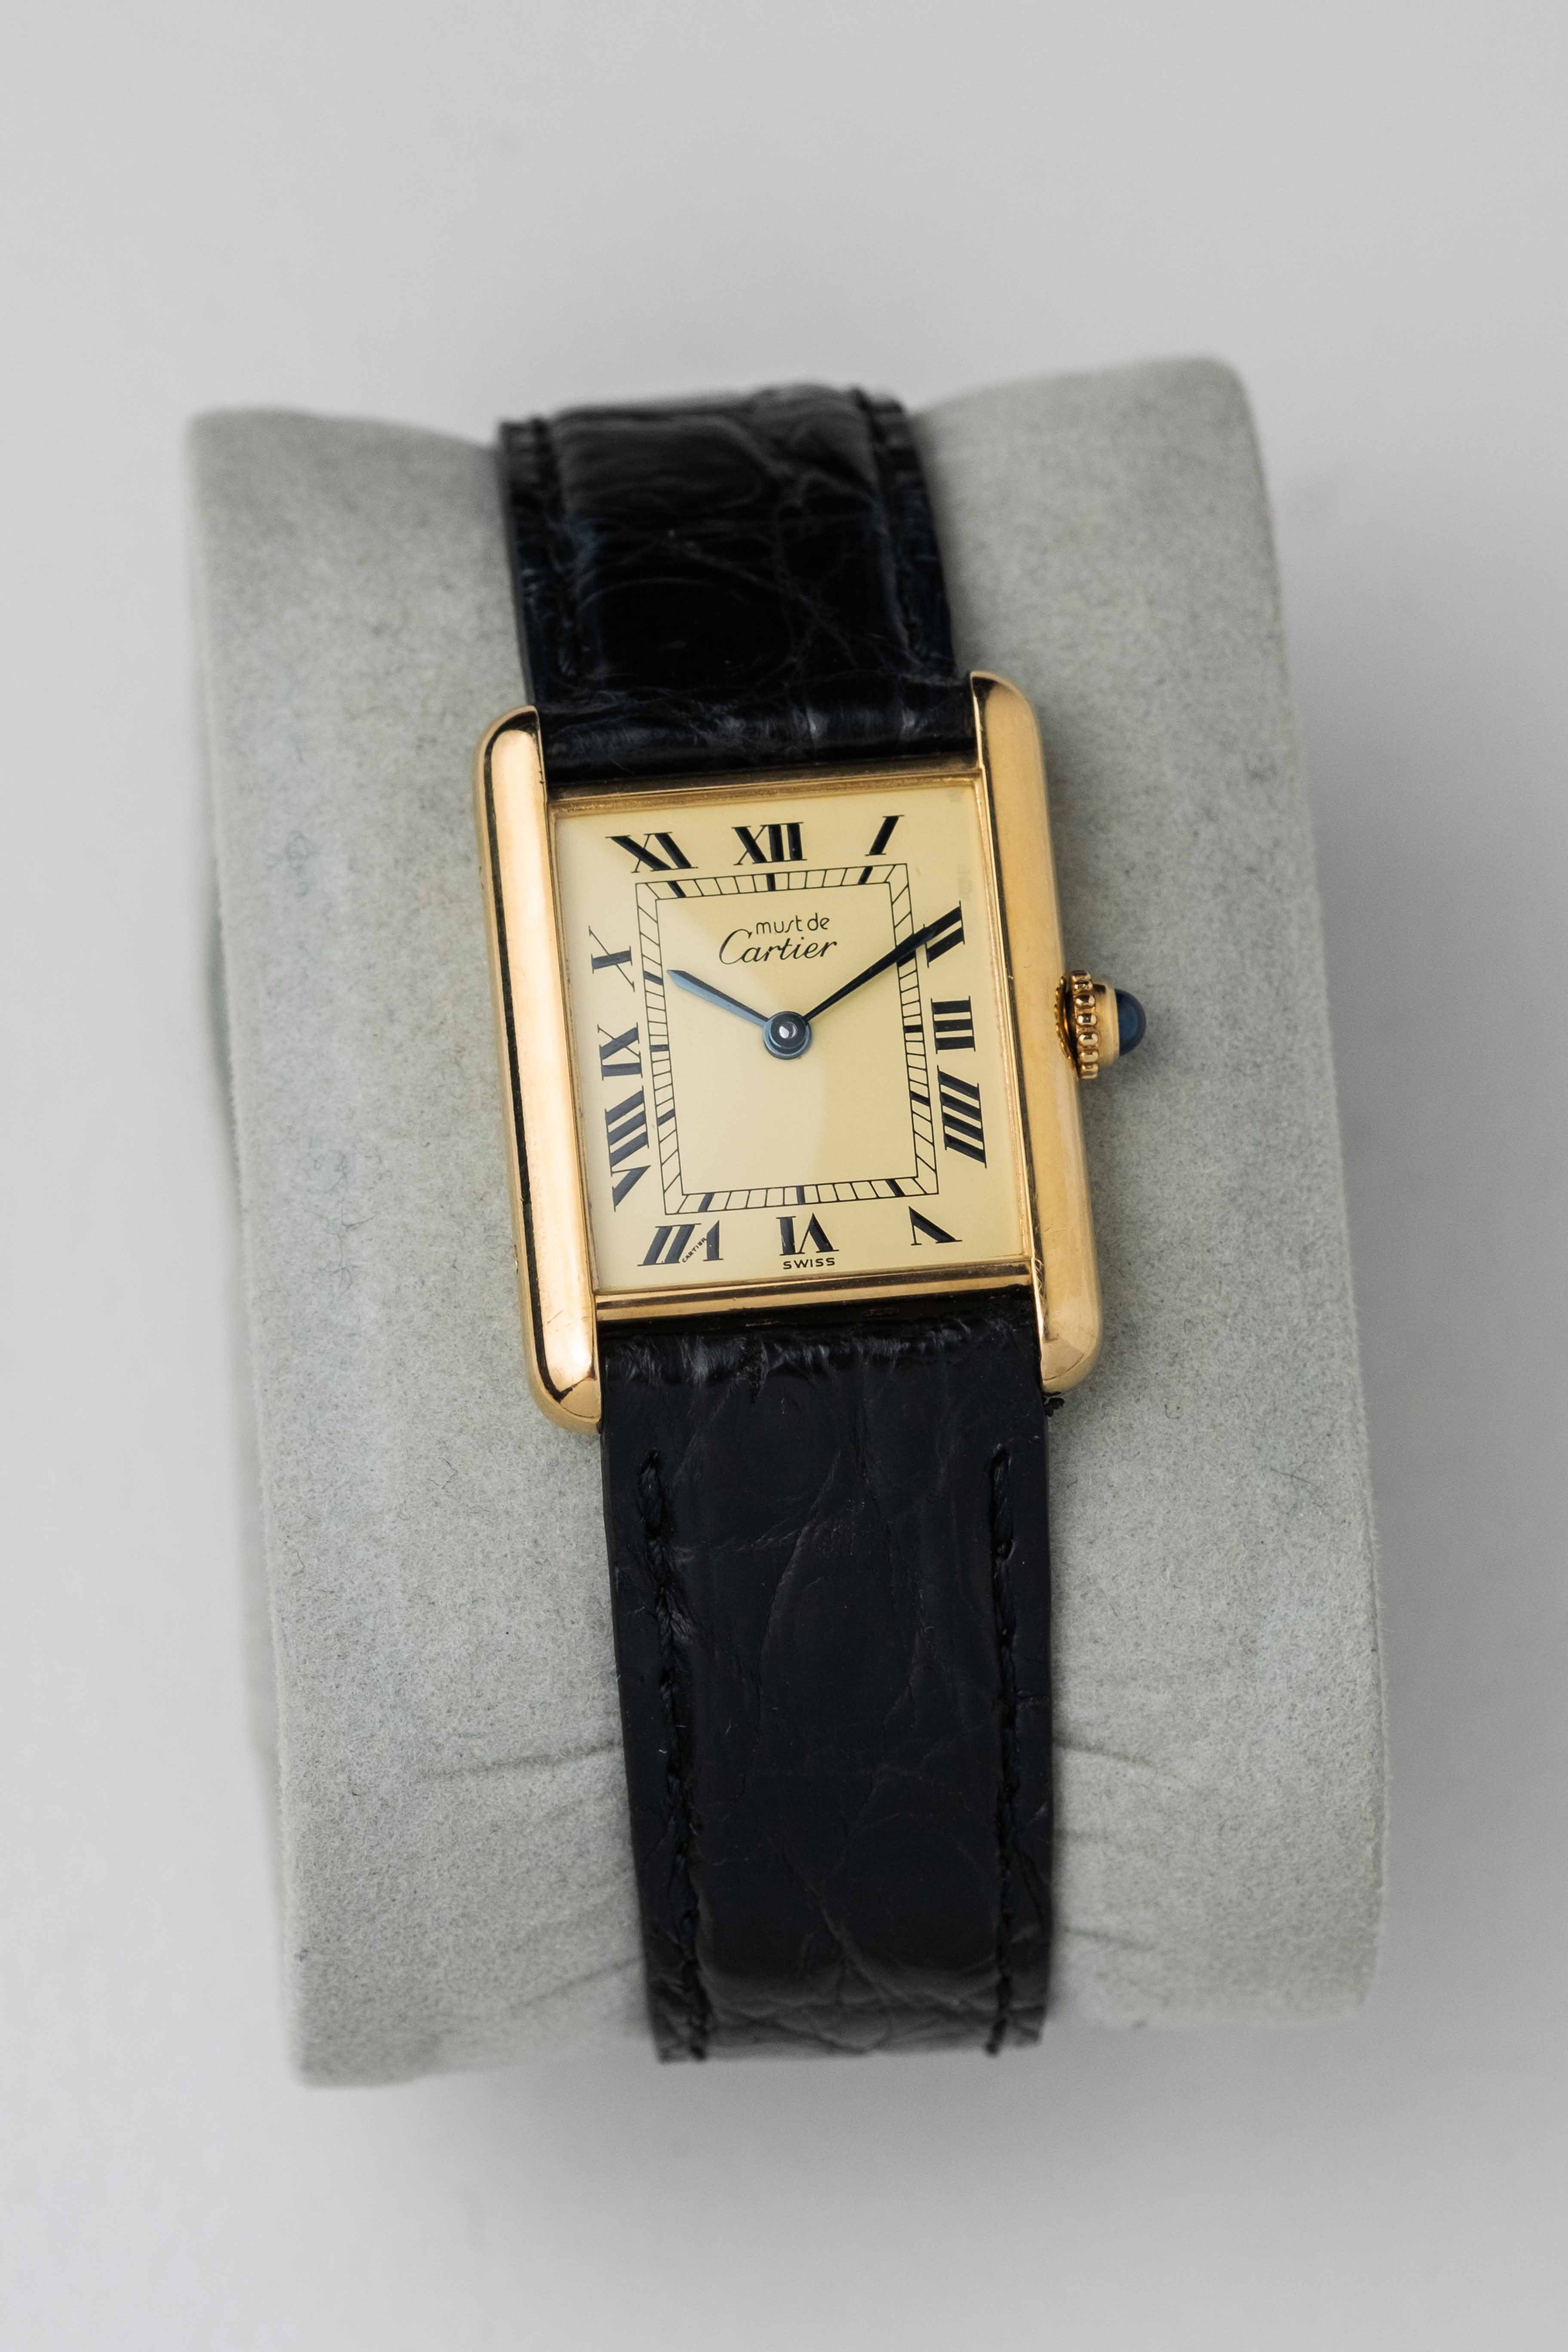 Cartier Tank Must De Cartier Ref. 590005 1990's Other Side Angle Photo